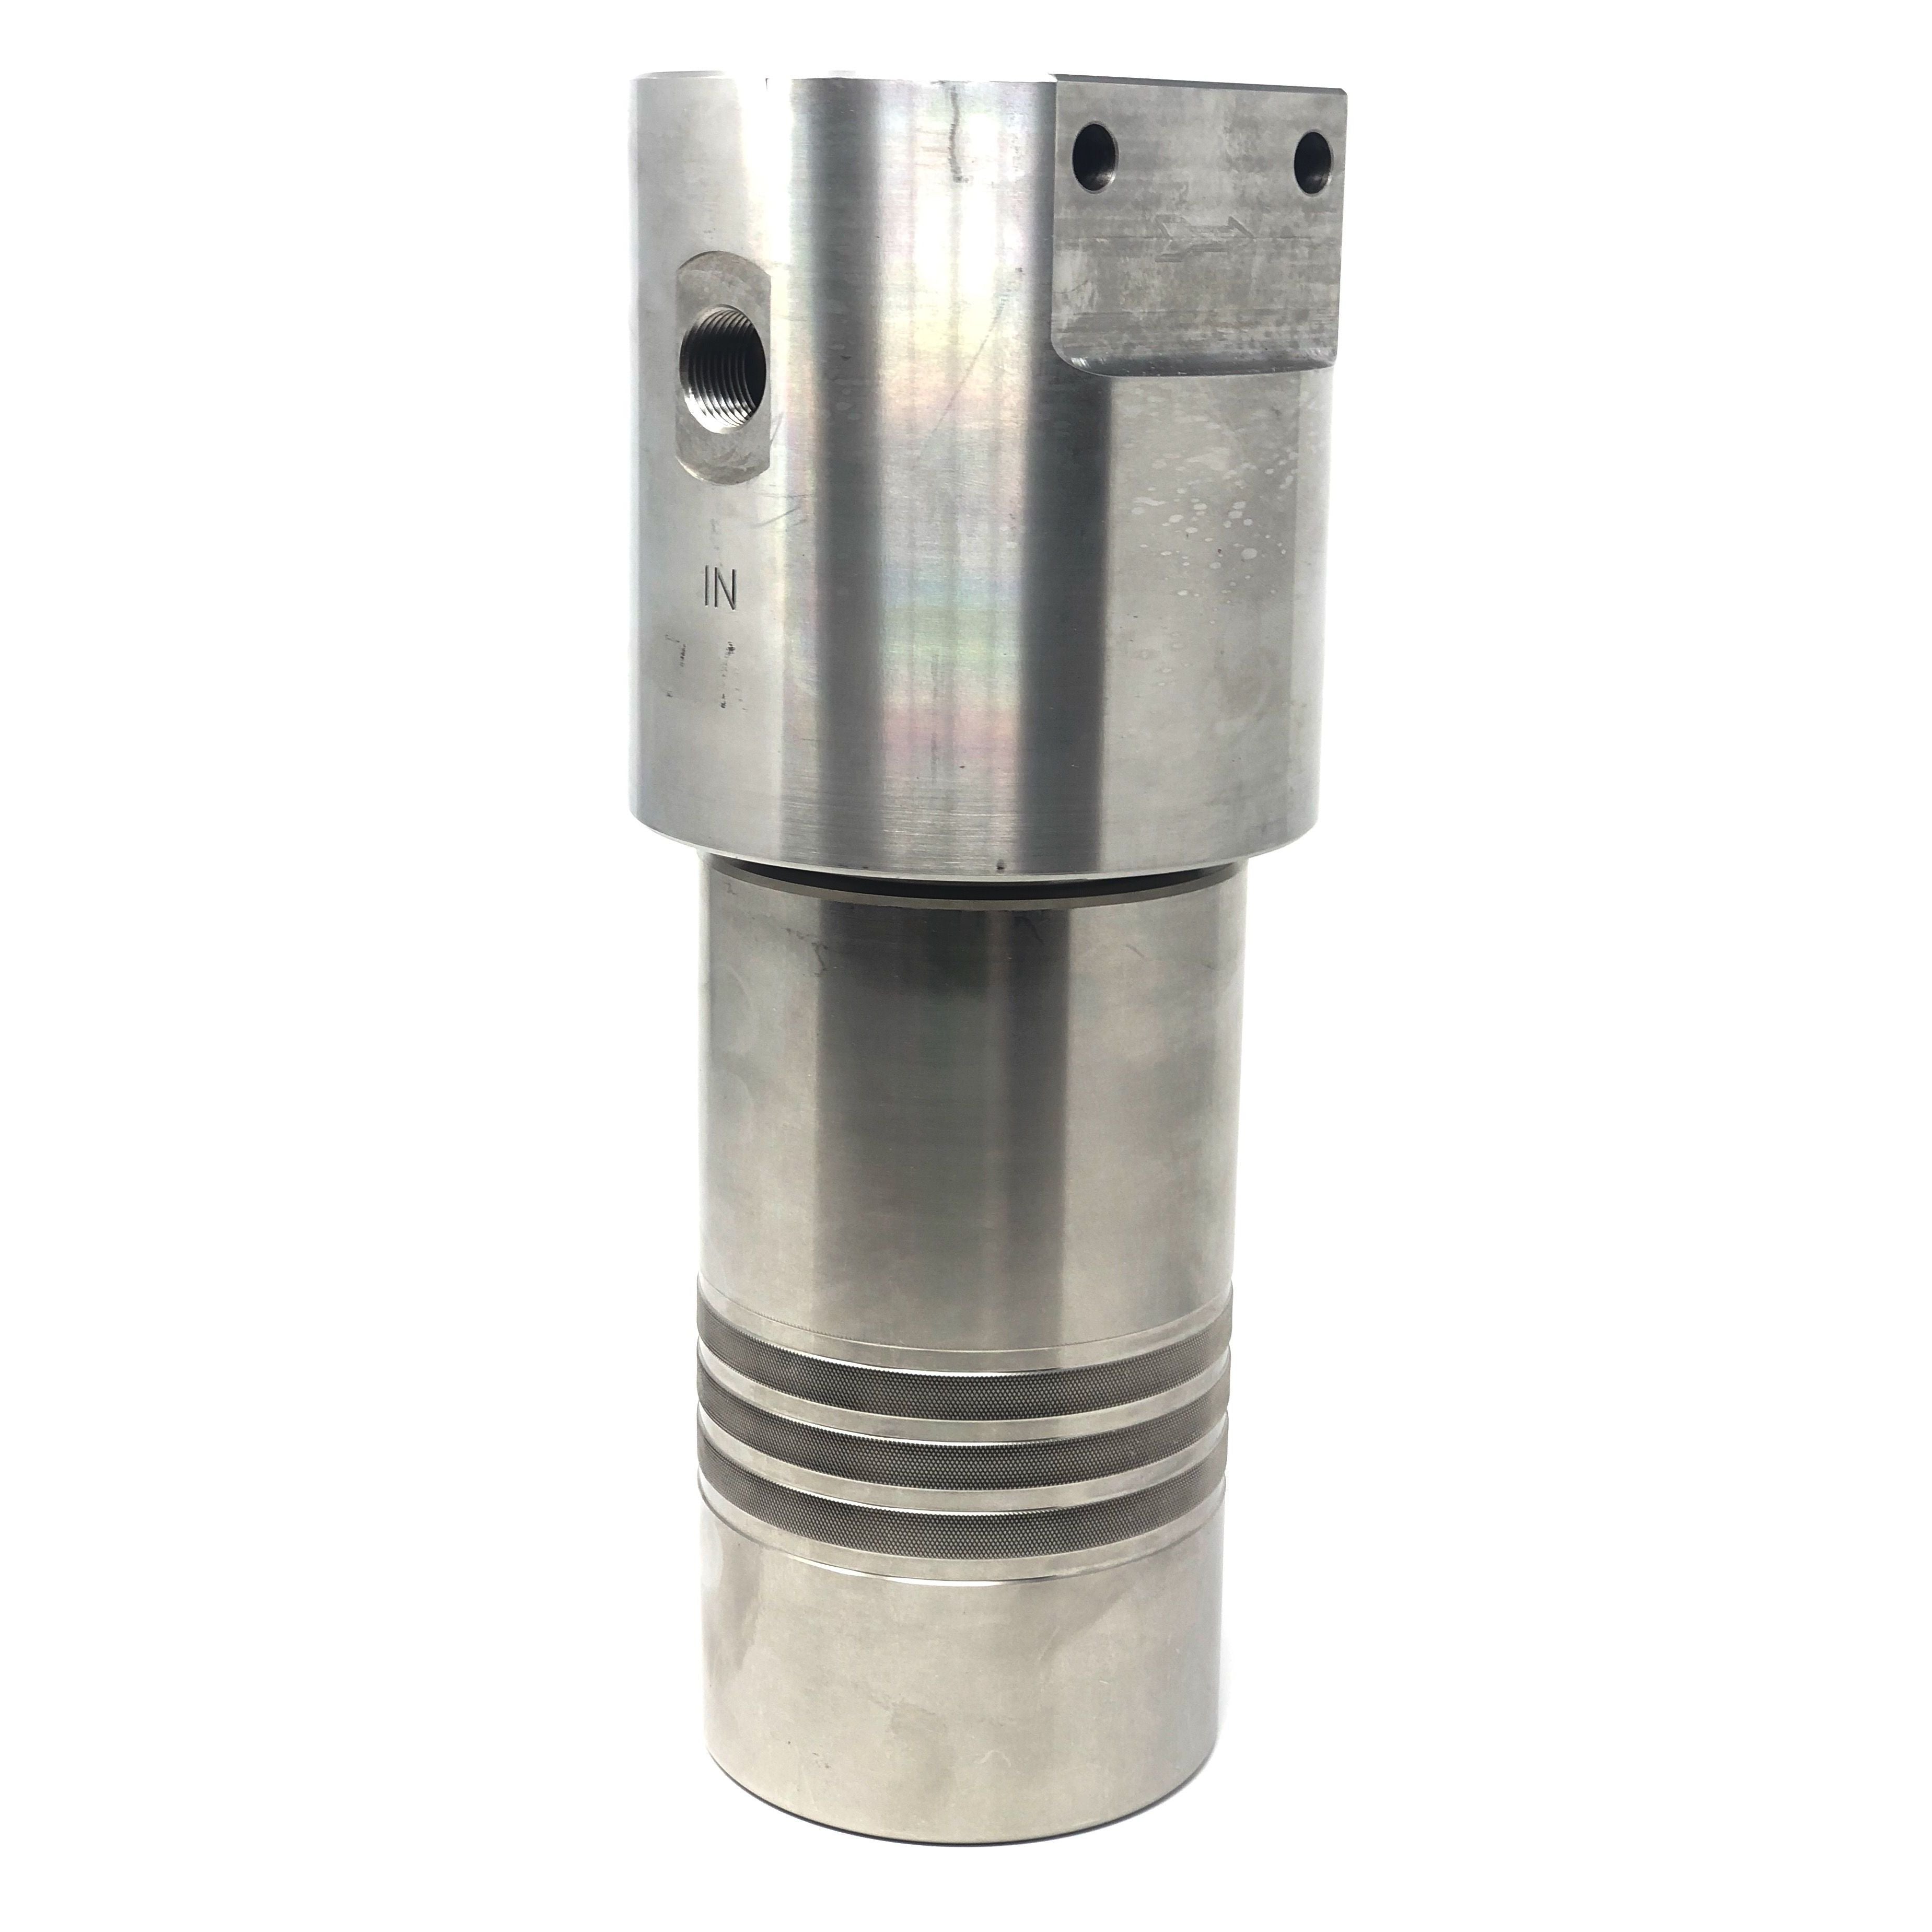 52S-2412N-3MDN : Chase Ultra High Pressure Inline Filter, 10000psi, 3/4" NPT, 3 Micron, With Visual Indicator, No Bypass